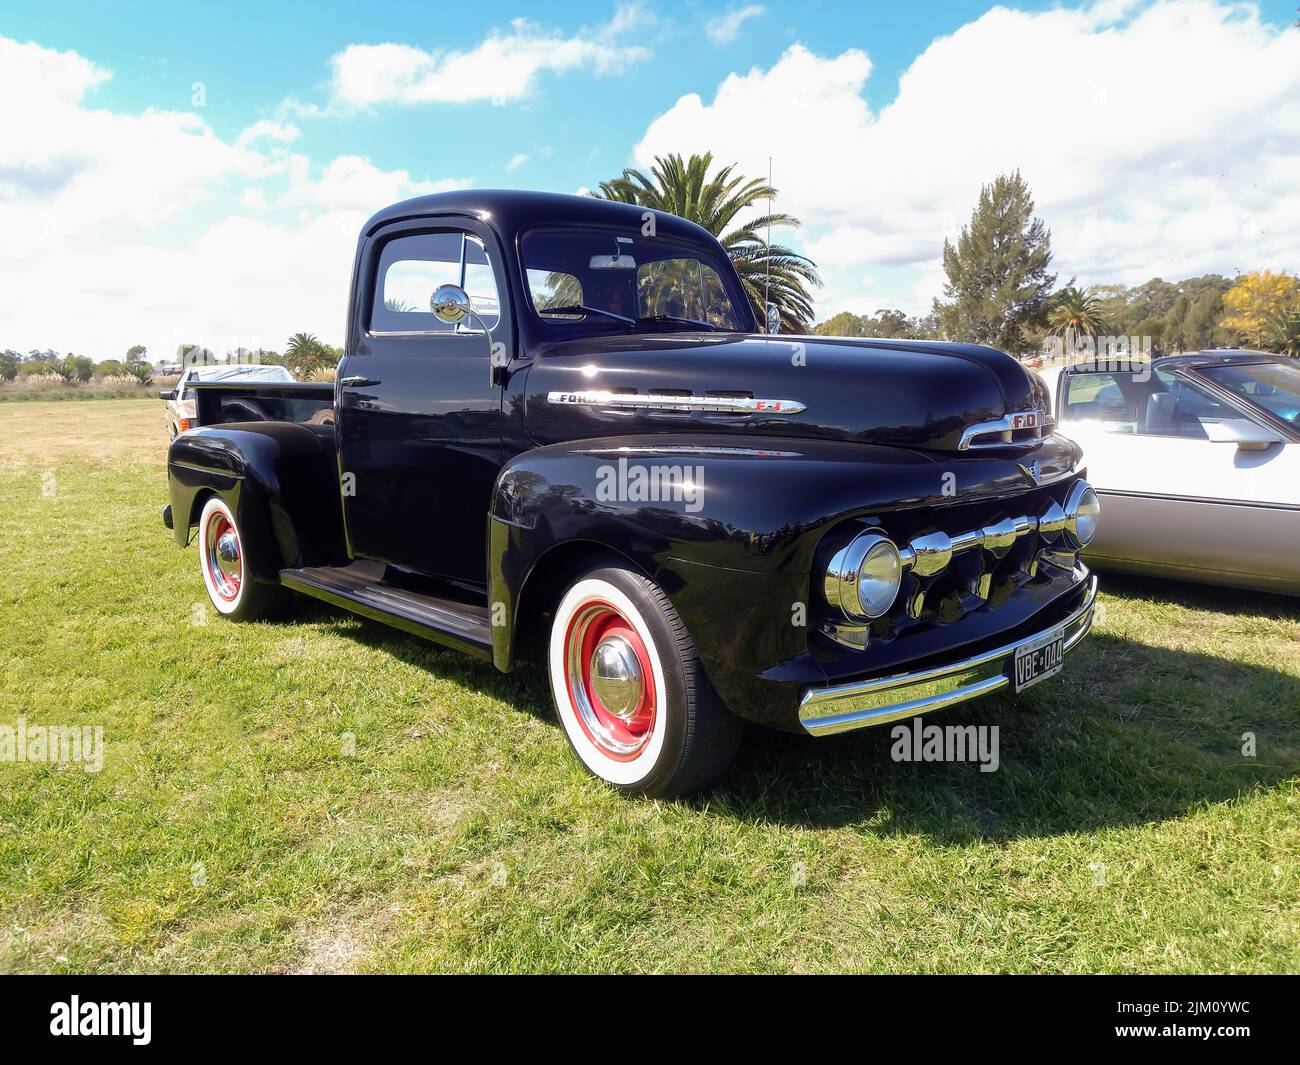 Chascomus, Argentina - Apr 09, 2022: Old black utility pickup truck Ford F 1 1950s in the countryside. Nature grass and trees. Classic car show. Copys Stock Photo